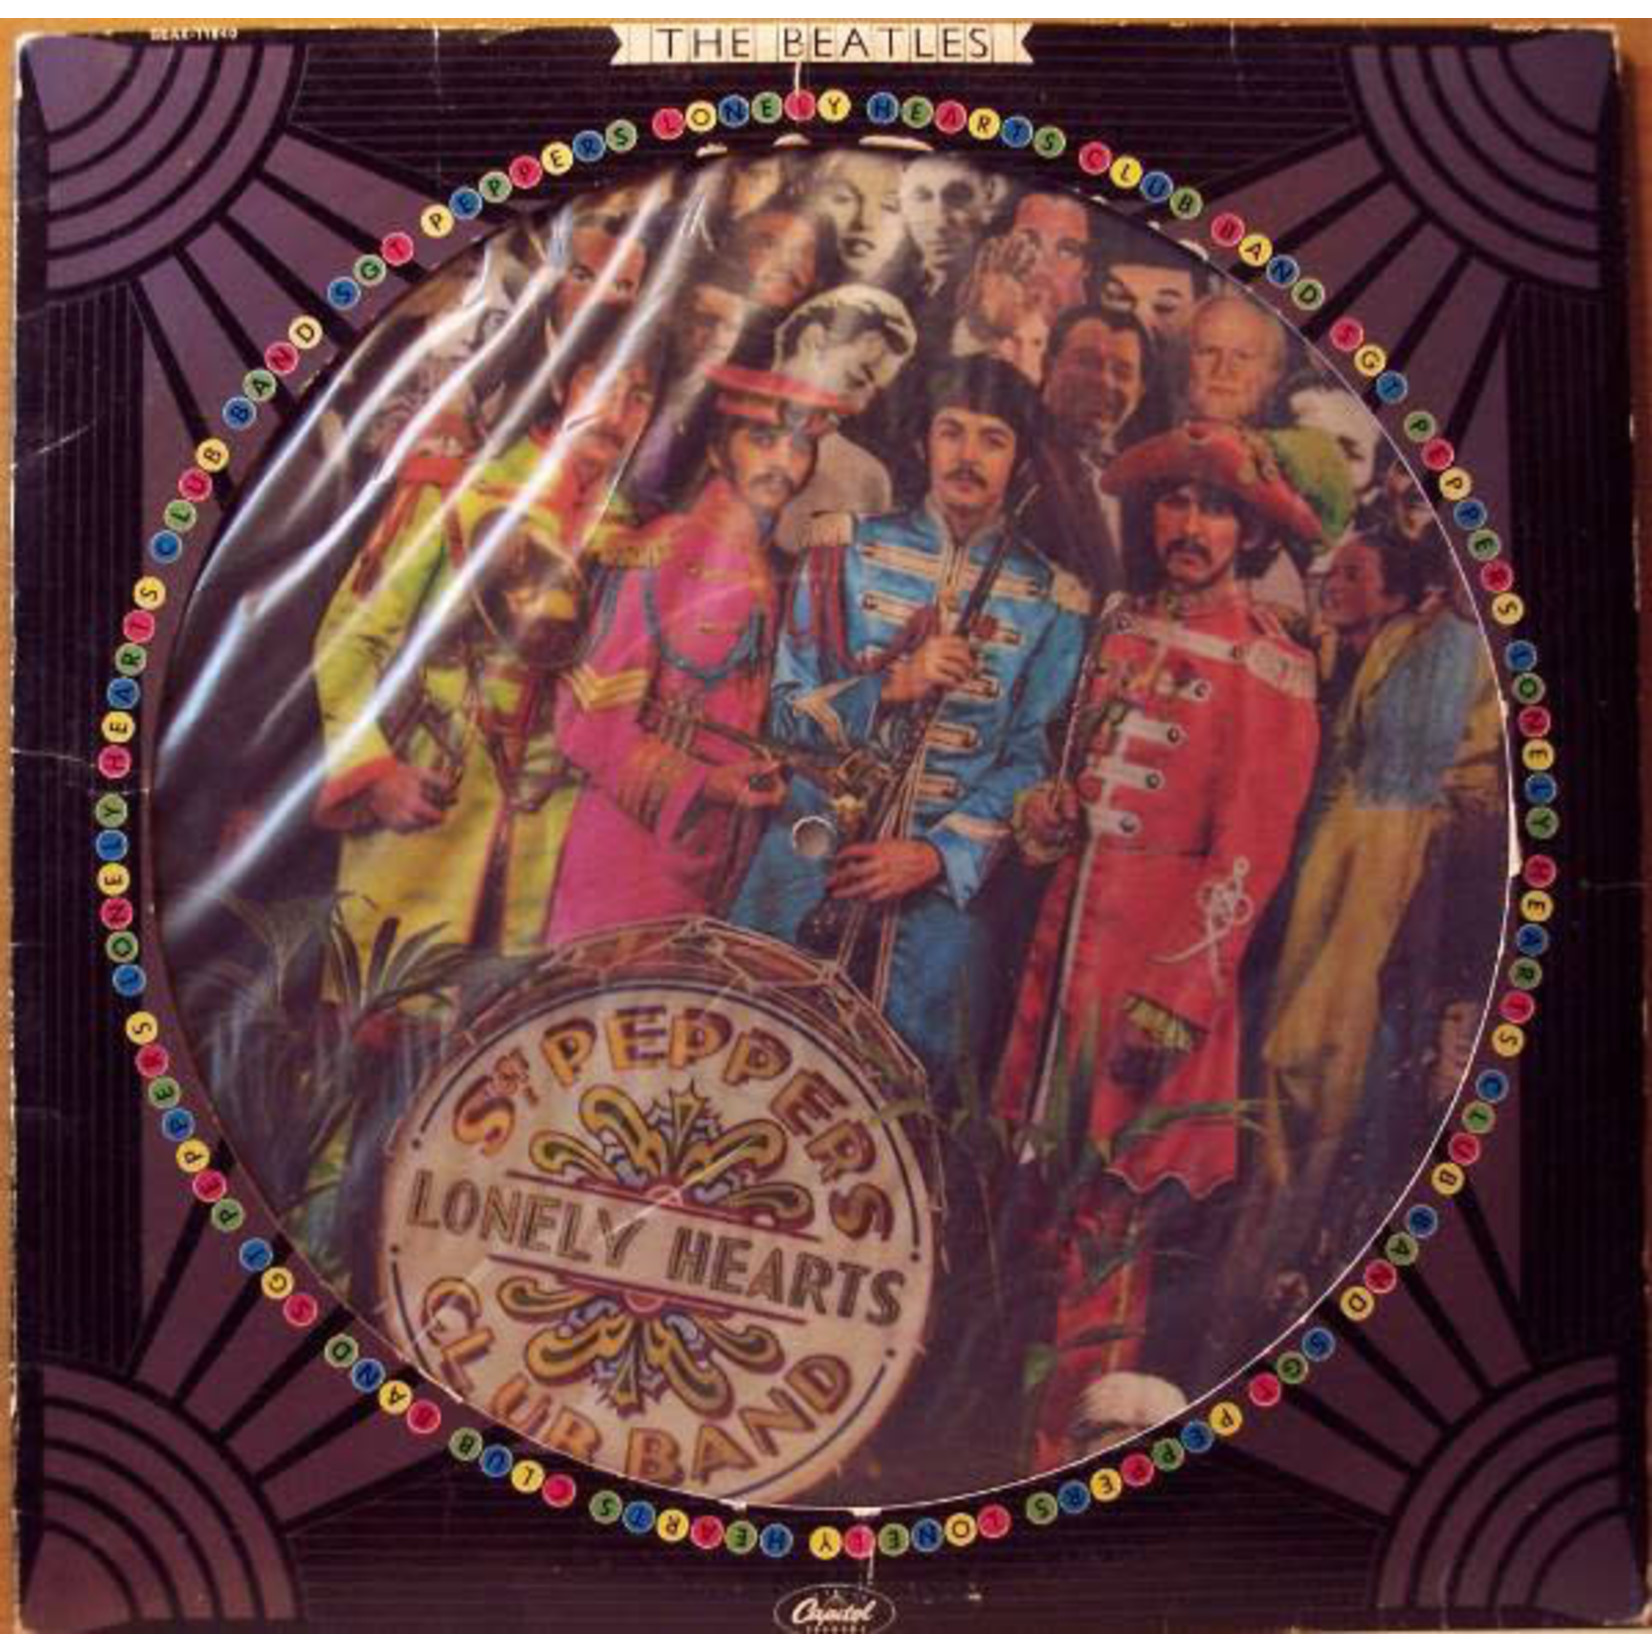 The Beatles The Beatles – Sgt. Pepper's Lonely Hearts Club Band (FACTORY SEALED, 1978, LP, Picture Disk, Capitol Records – SEAX-11840) DSG